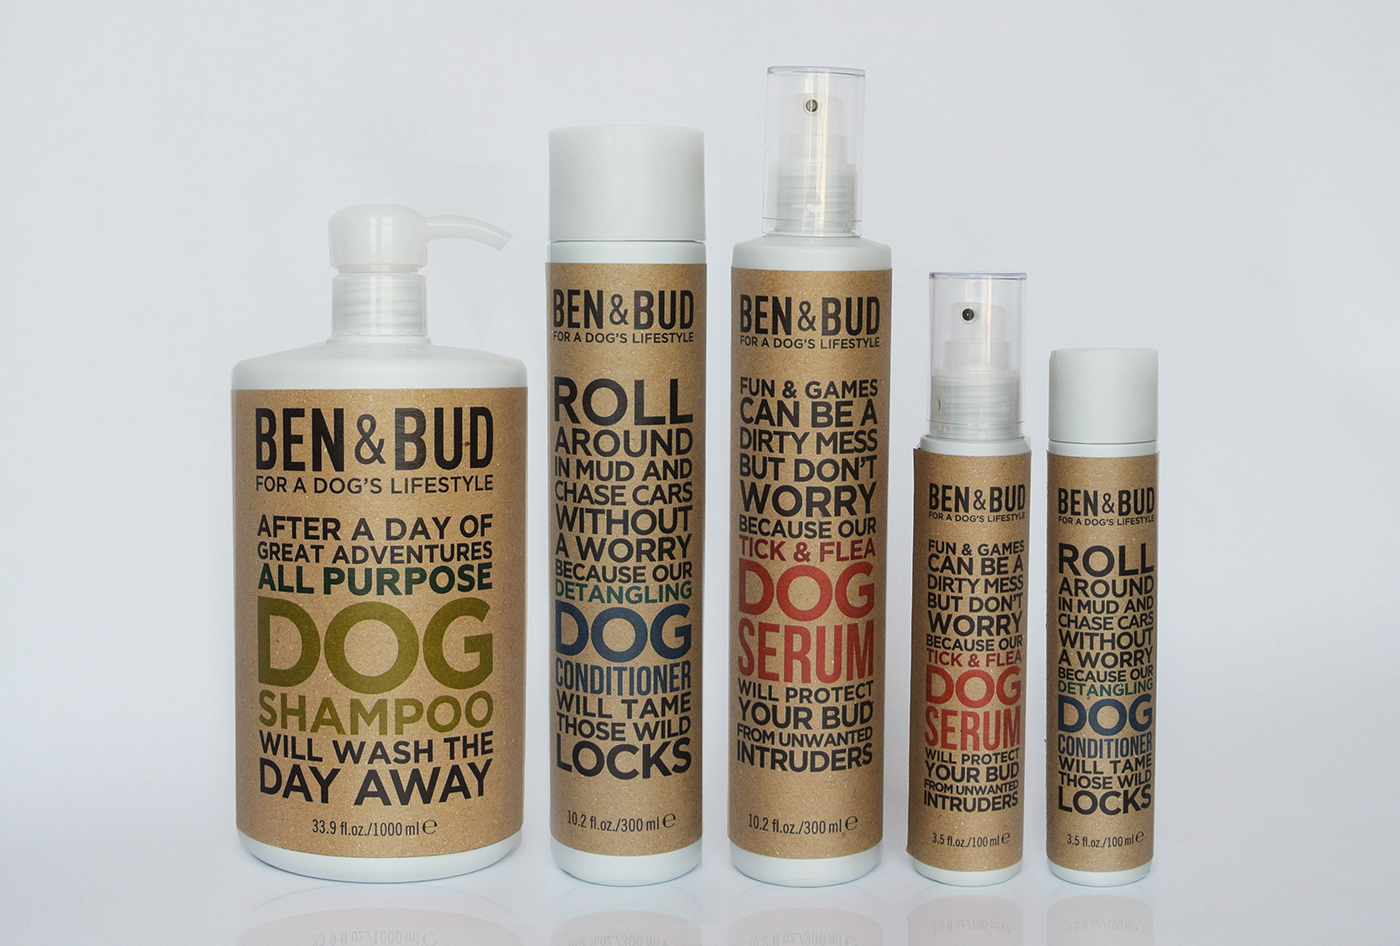 dog shampoo bottle Pack petcare Pet animals grooming beauty typographic Label quote bath camping adventure